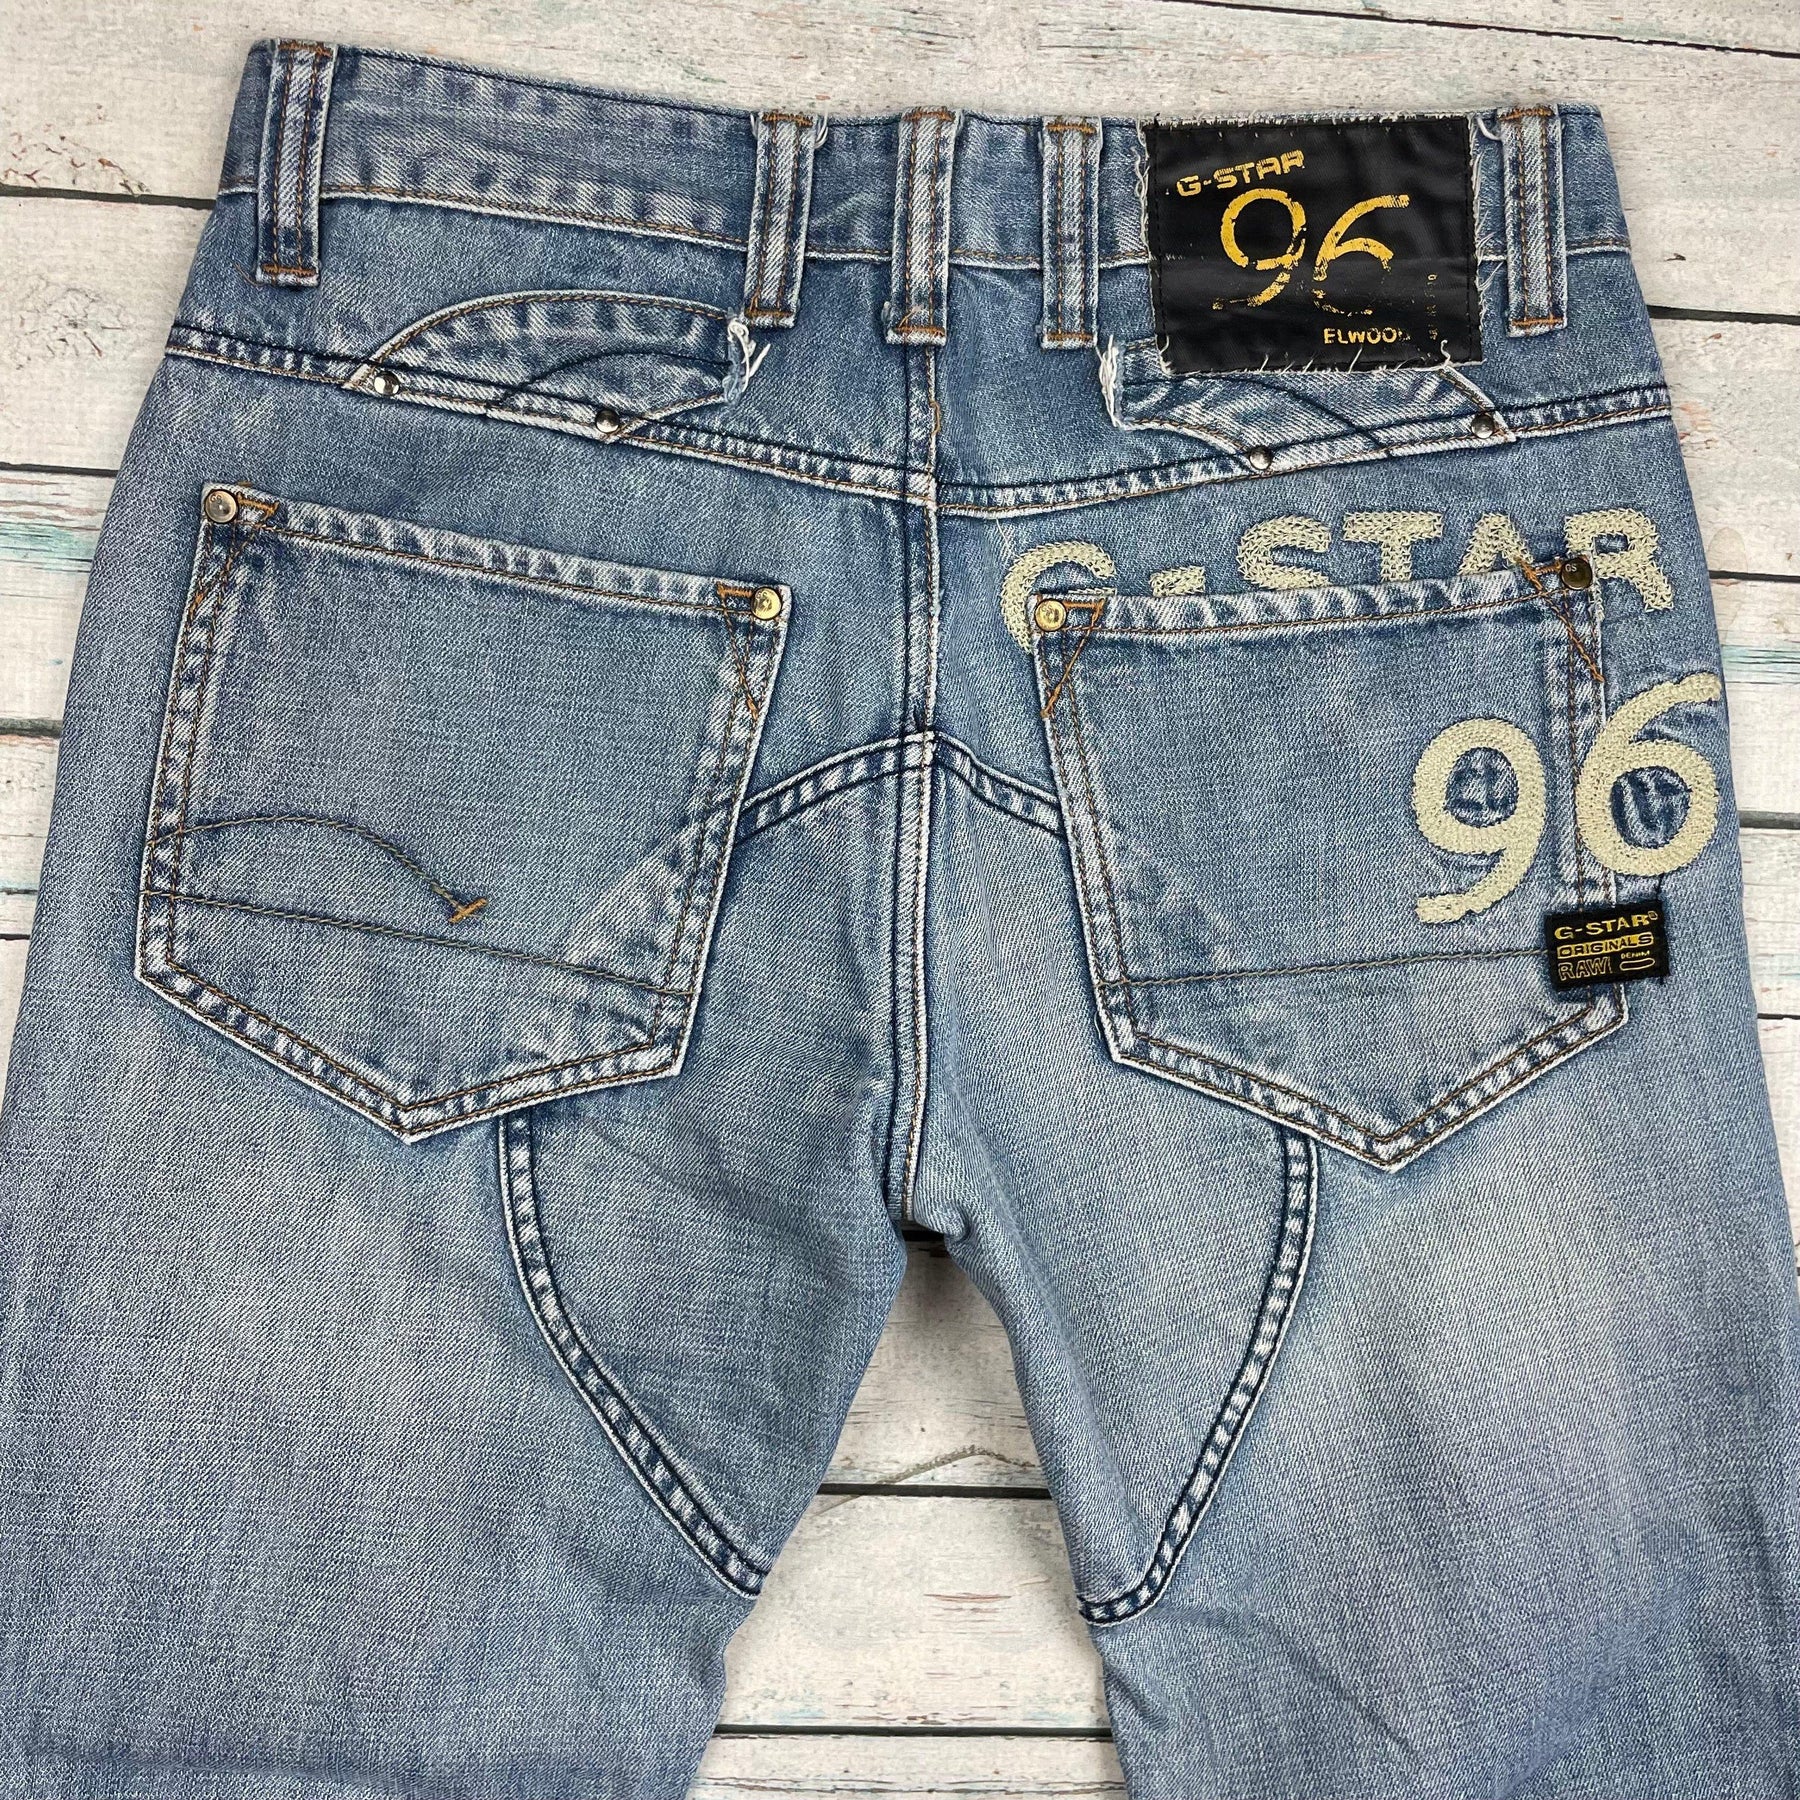 Marxistisch Immoraliteit kant G Star RAW Elwood 96 Distressed Jeans -Size 30/32 – Jean Pool